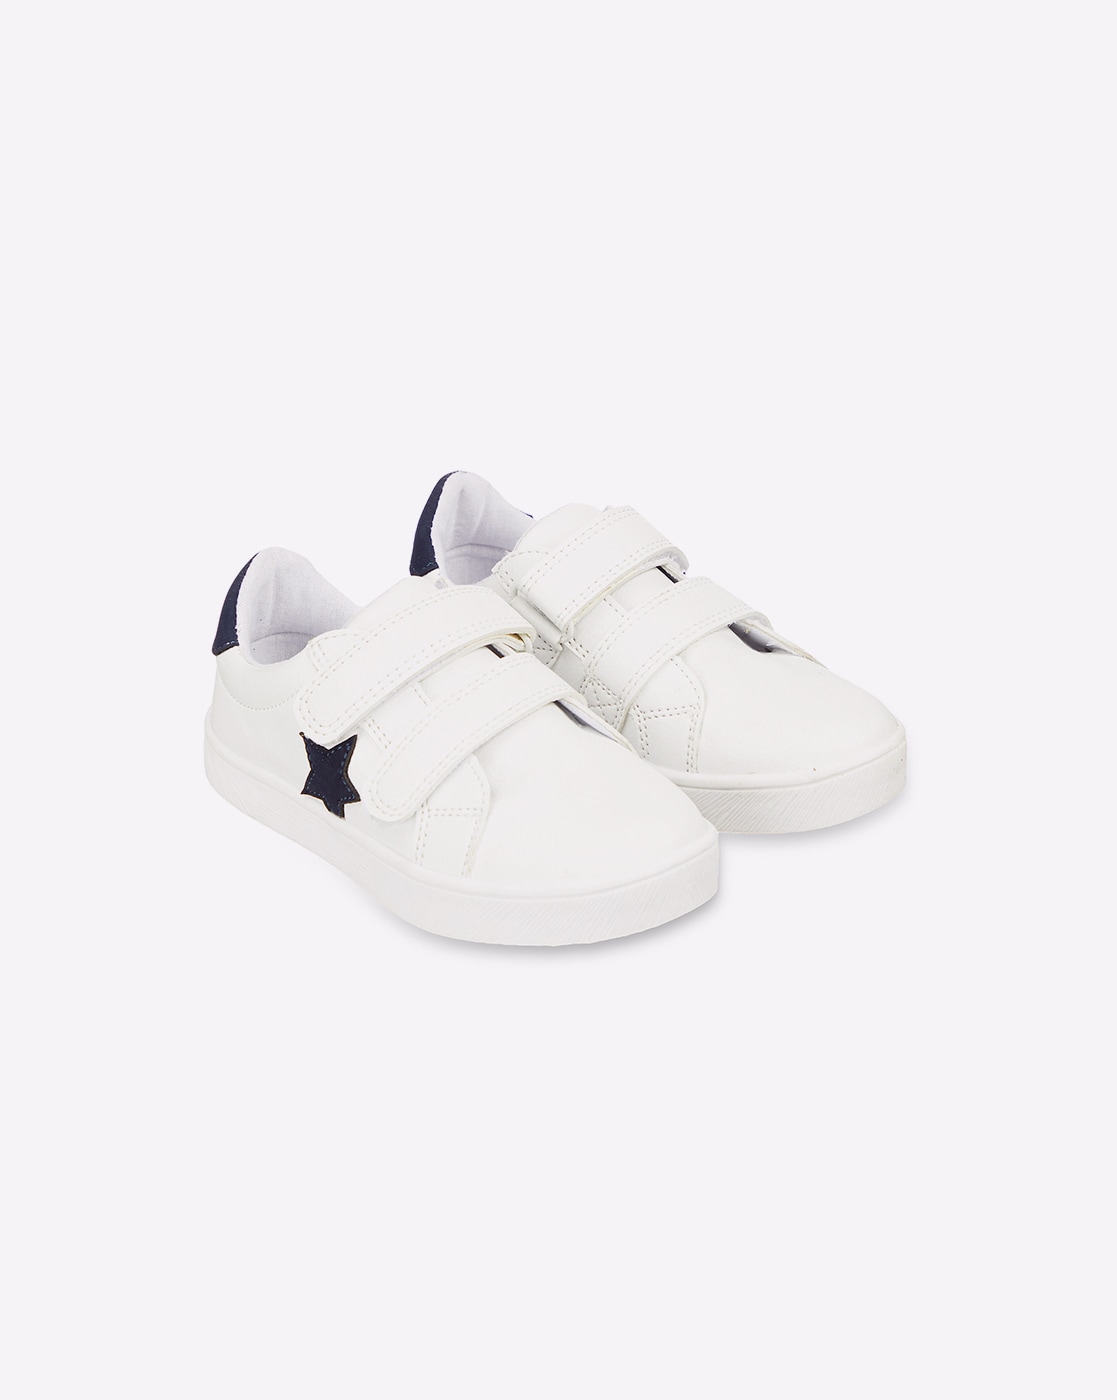 mothercare baby boy shoes